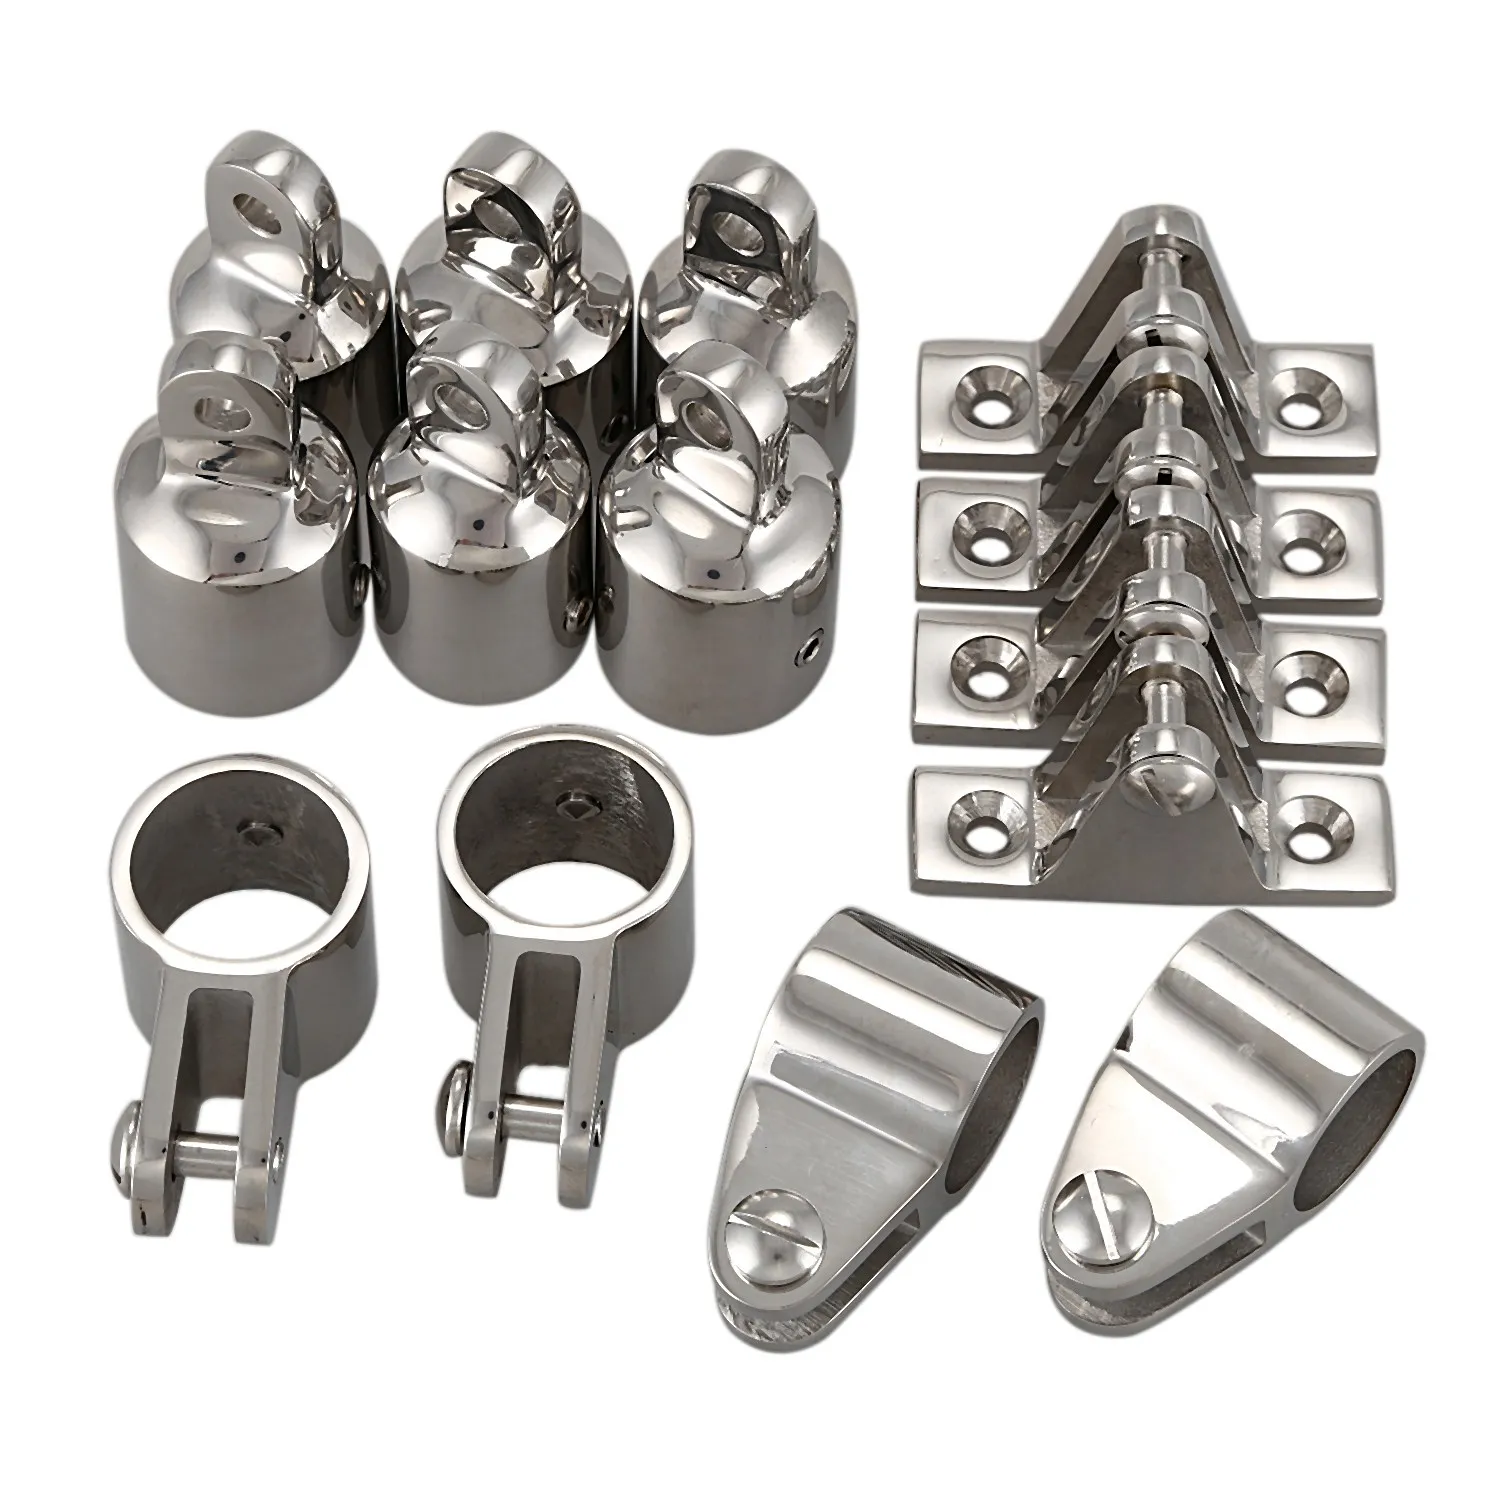 

Boat Accessories Marine 316 Stainless Steel 3-Bow Bimini Top Boat Stainless Steel Fittings Marine Hardware Set Yacht Accessories